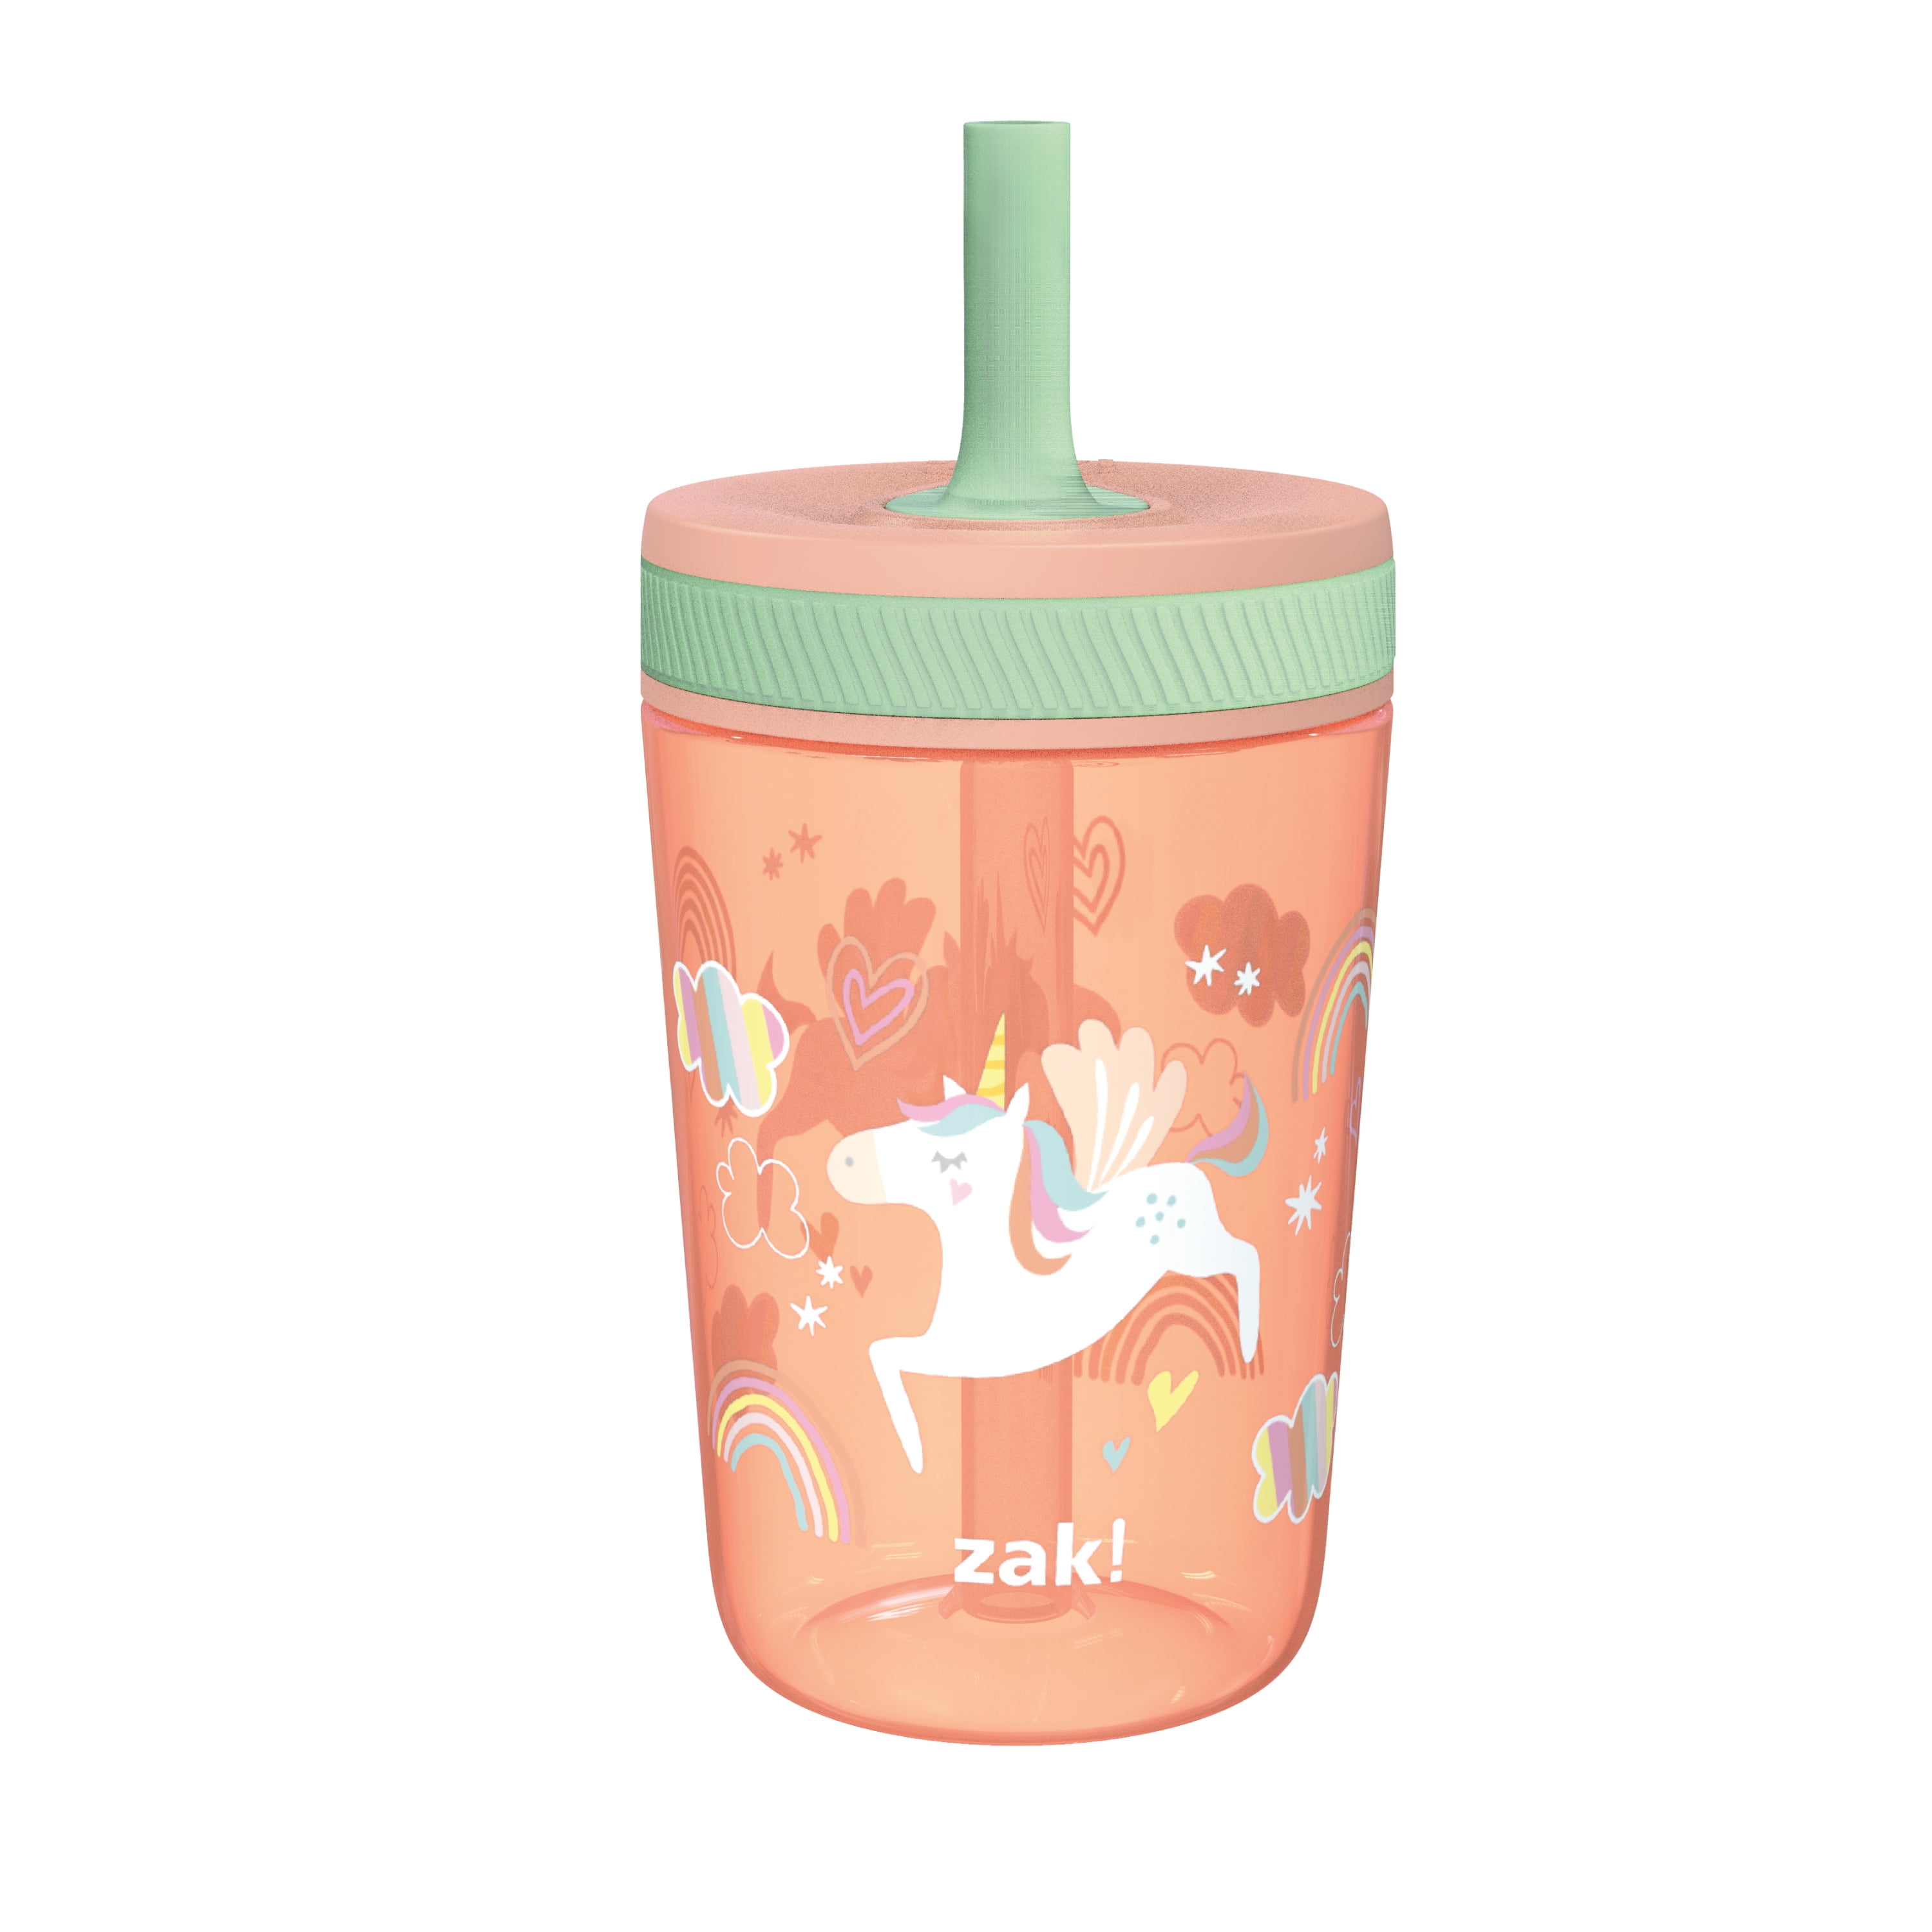 Unicorn Sippy Cup Stainless Steel Toddler Baby Shower Gift – Giftsparkes